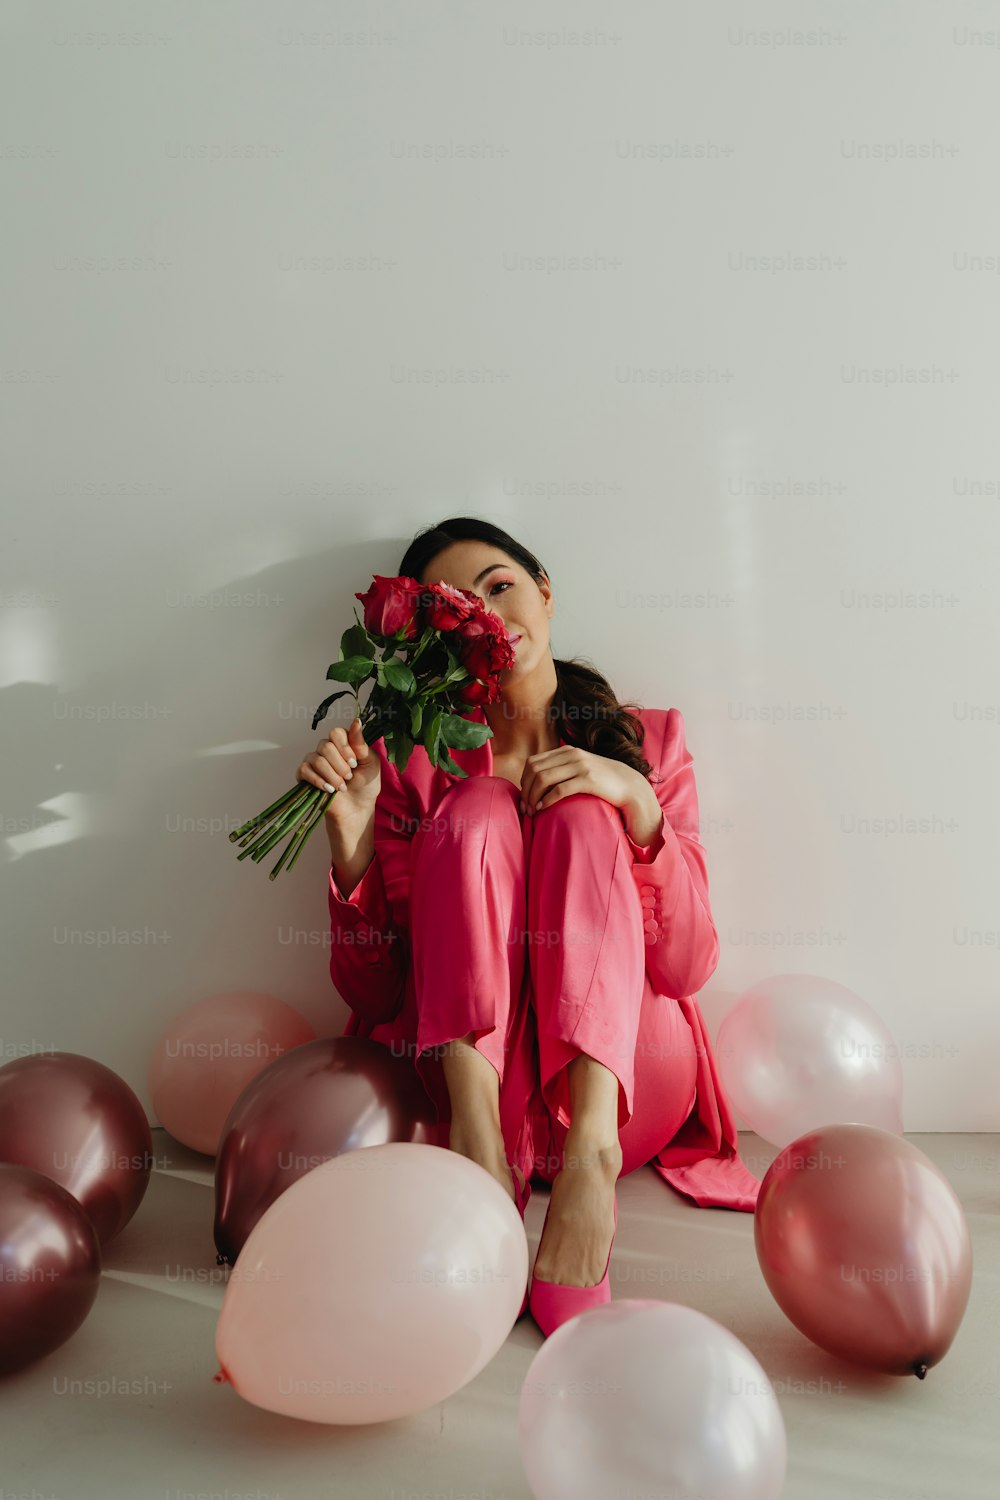 a woman sitting on the floor with balloons and flowers